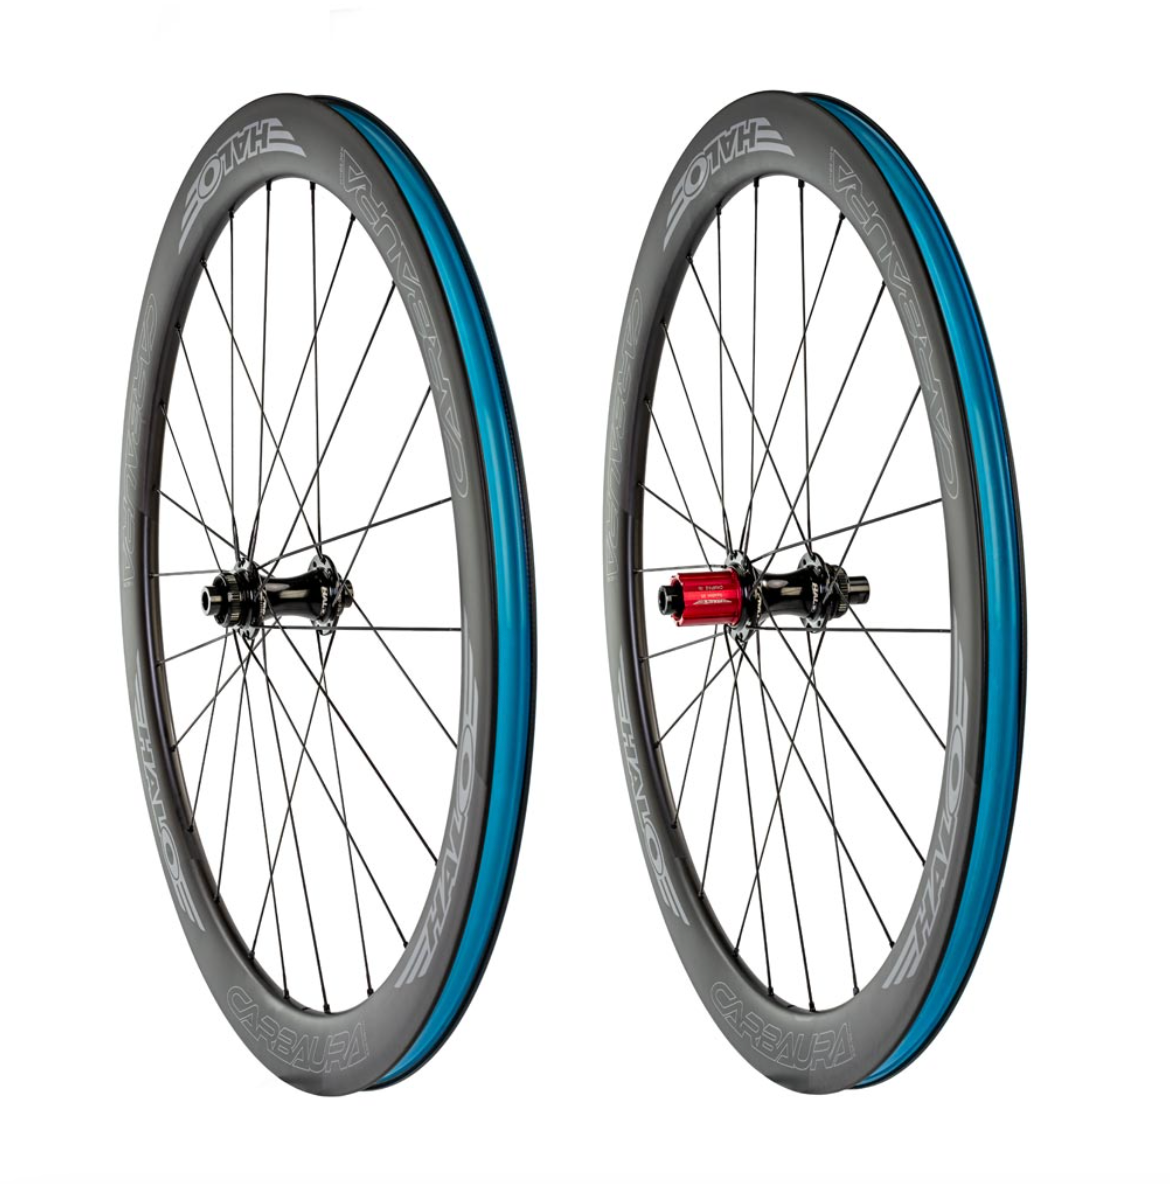 Halo Carbaura RCD 700c Wheelsets